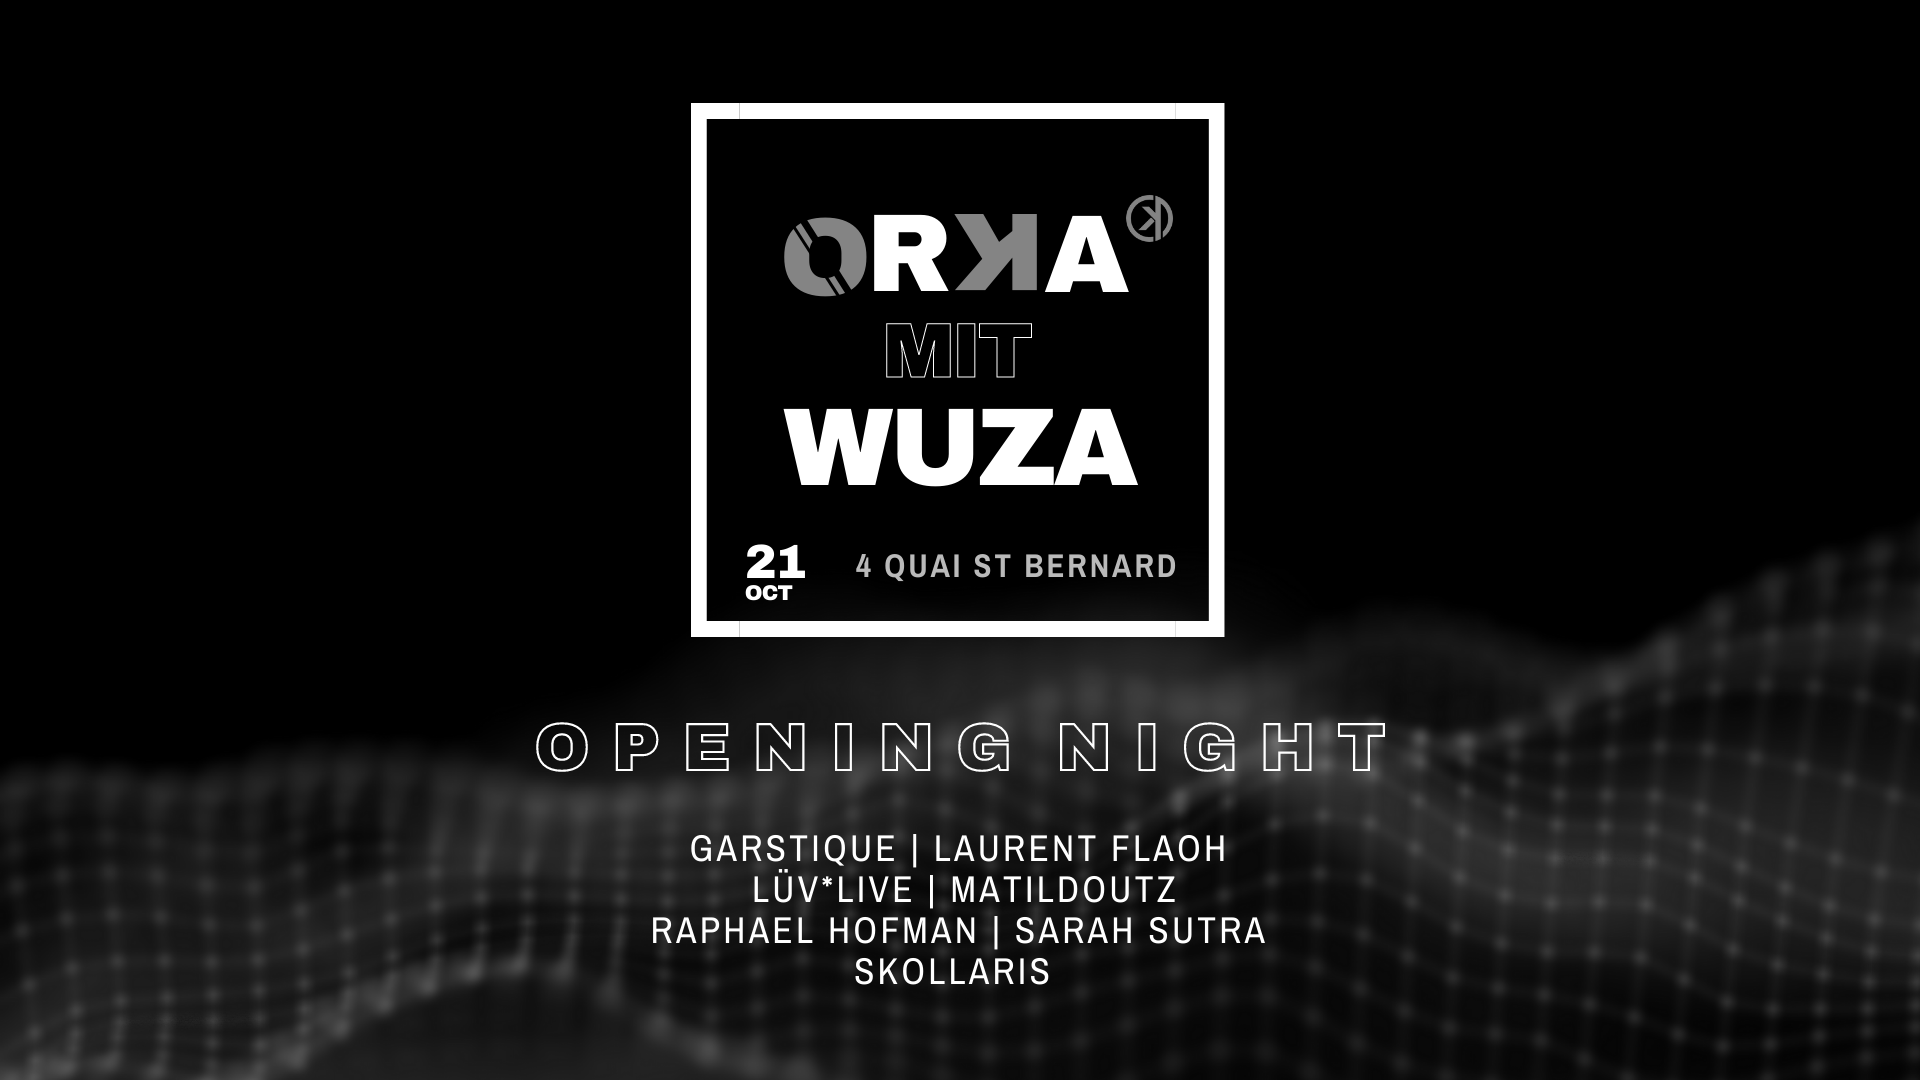 Orka mit WUZA: OPENING PARTY - フライヤー裏